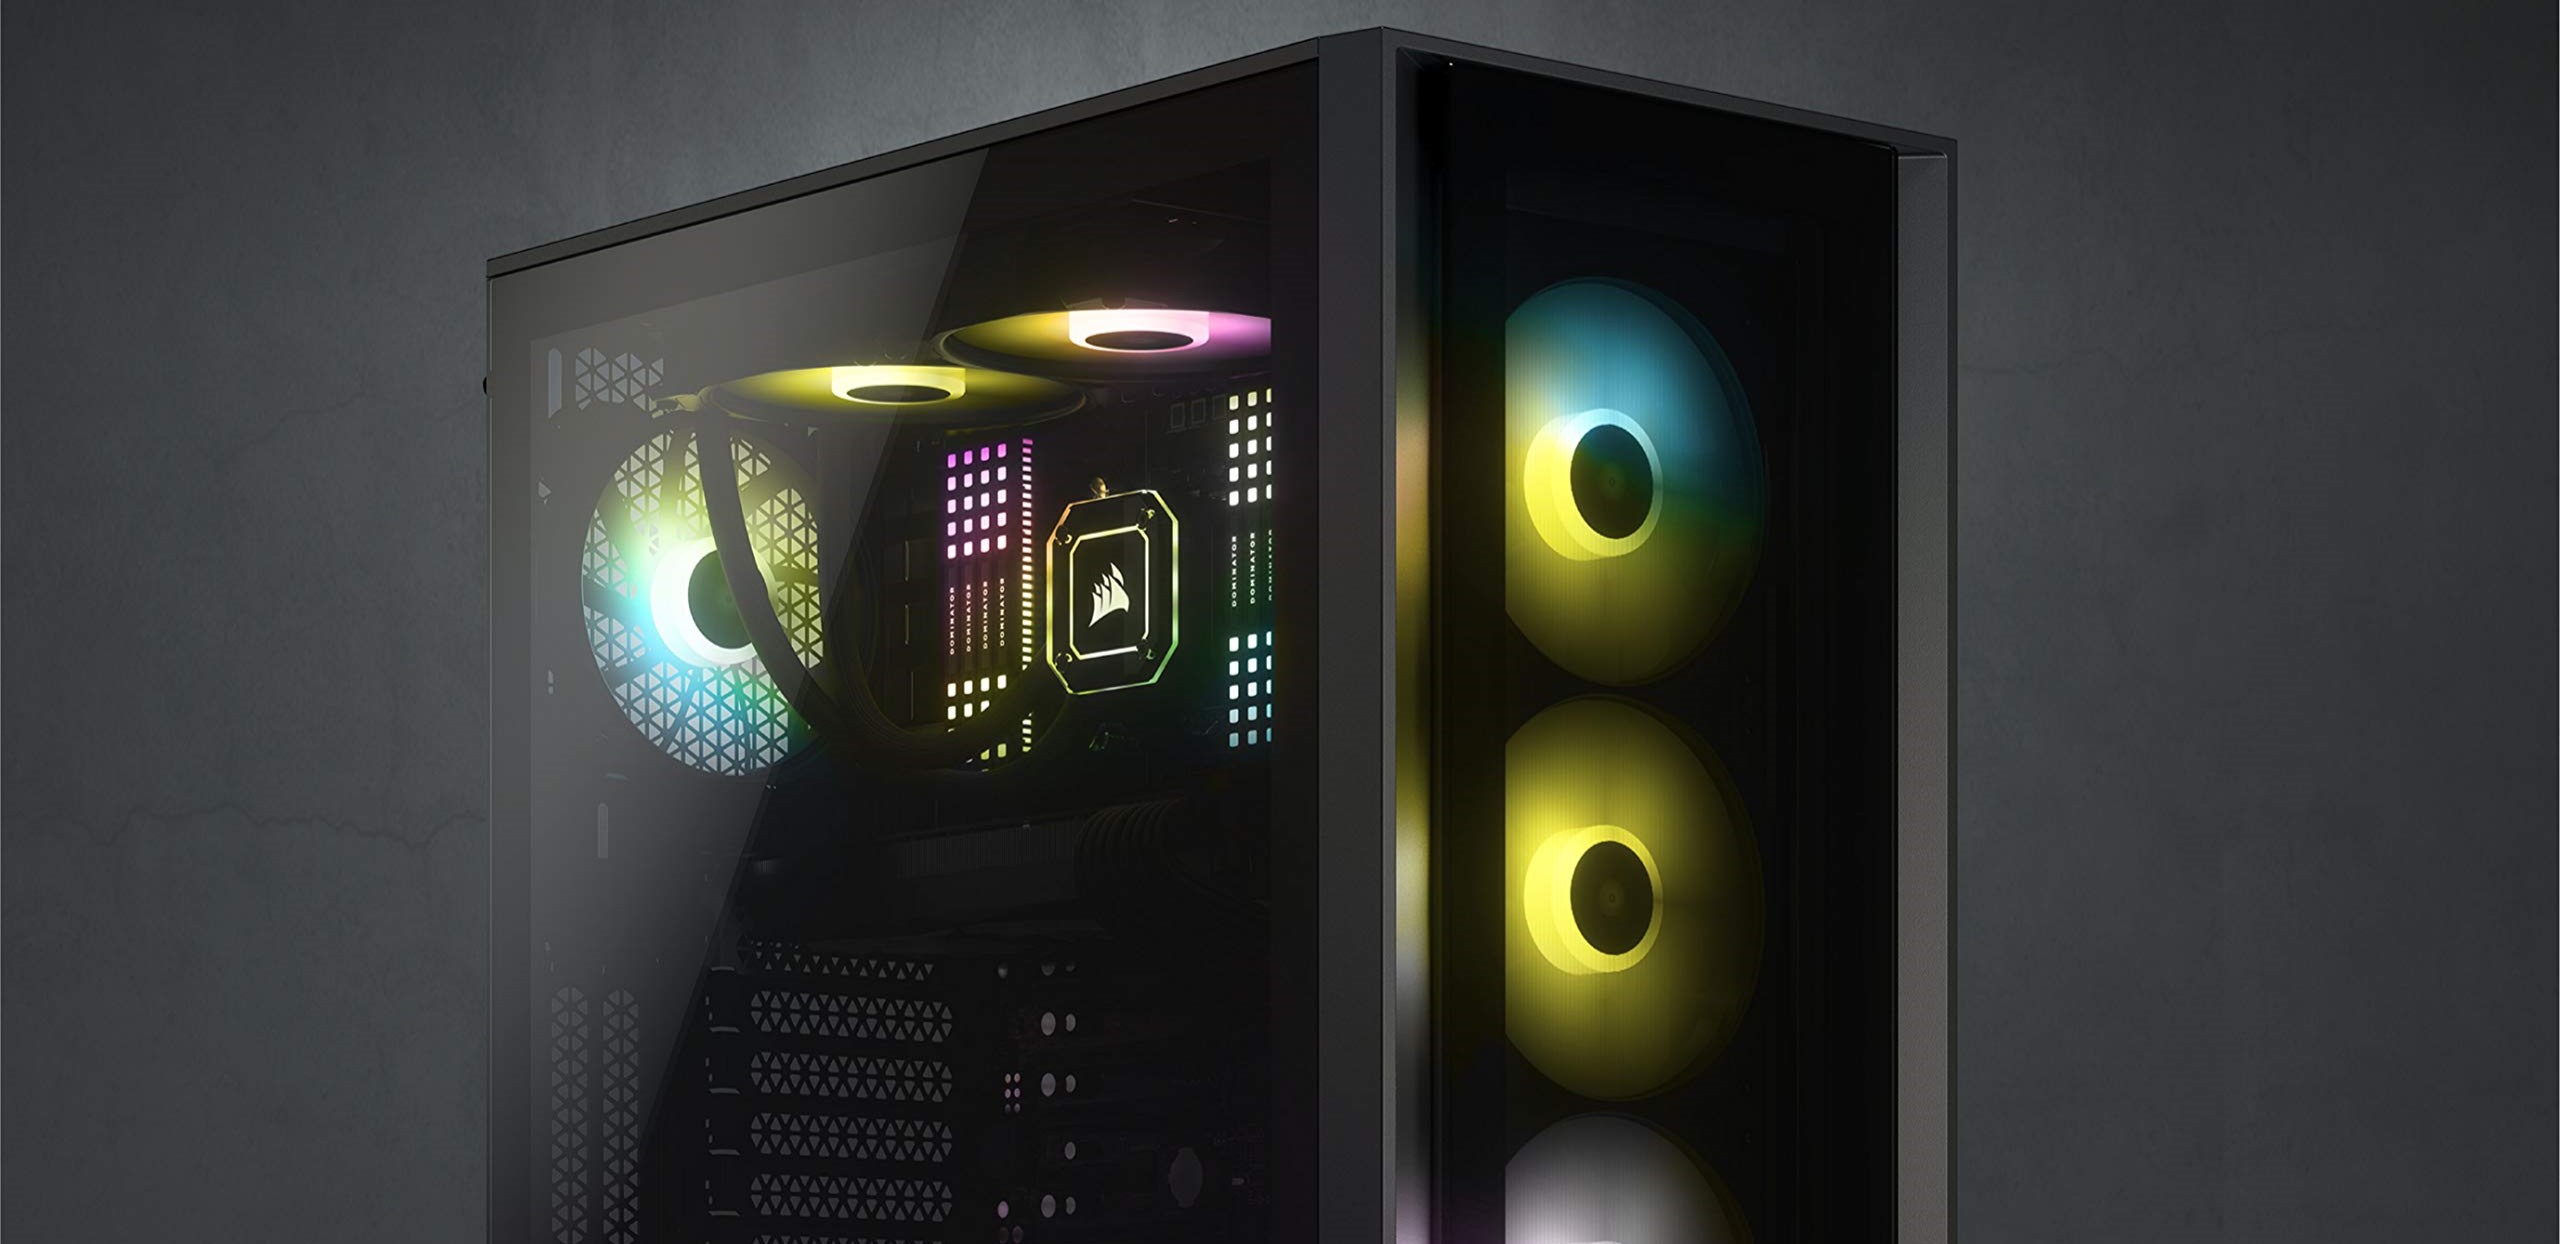 The Ultimate Gaming PC: 8 Must-Have Specs and Build Guide